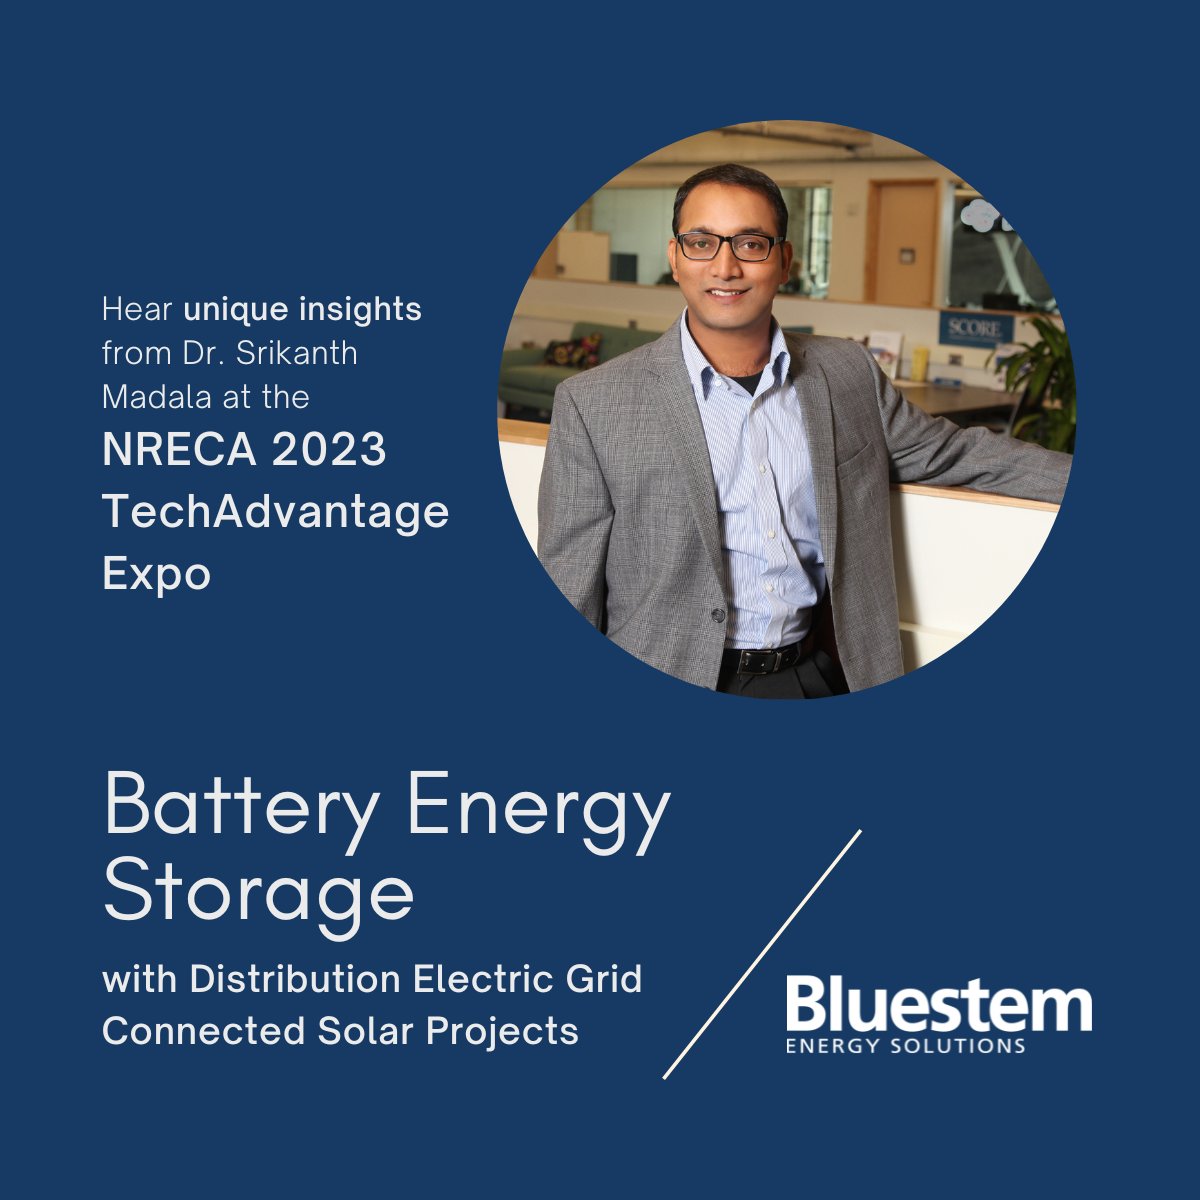 Don't miss Srikanth Madala's presentation at @NRECANews's 2023 #TechAdvantage Expo! Our Director of Research & Development will be discussing his analysis of battery energy storage with distribution electric grid-connected solar projects.